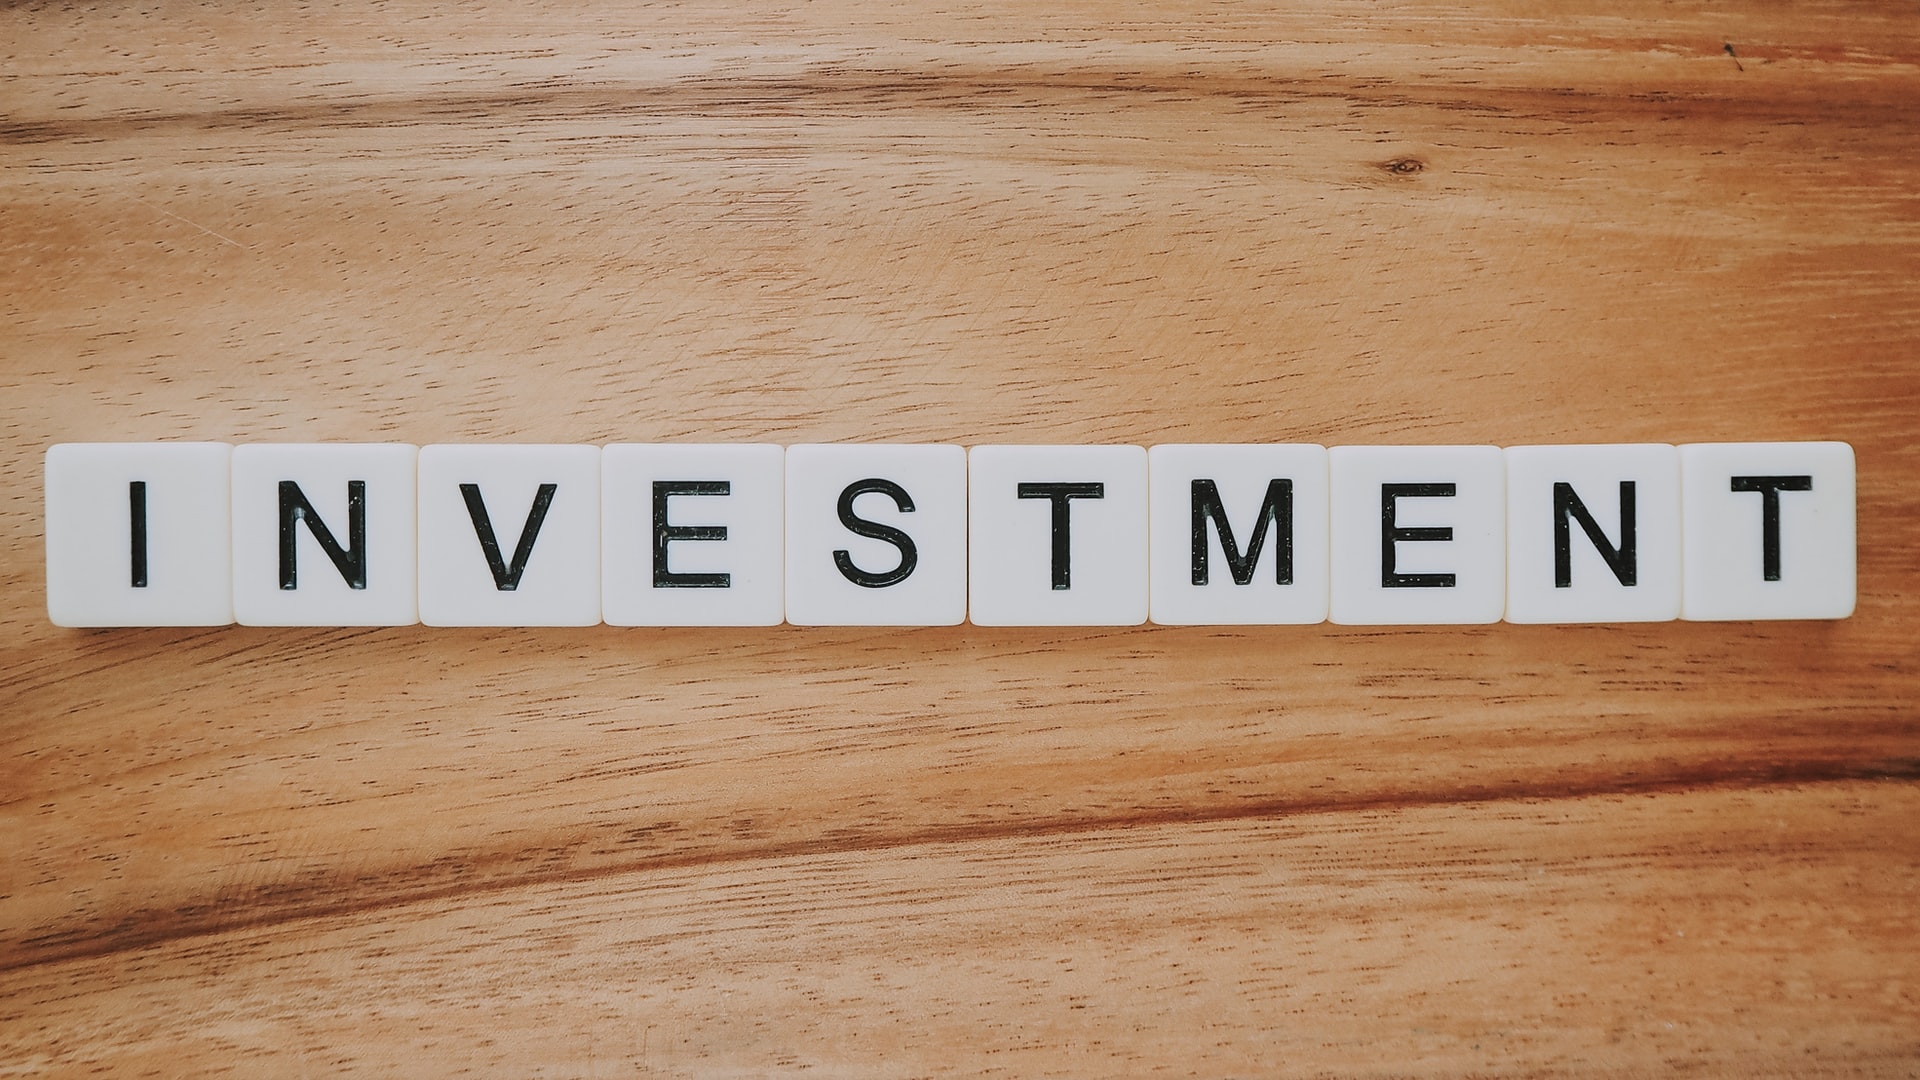 Fidelity Investments Extends Offerings By Focusing On Metaverse And ETFs